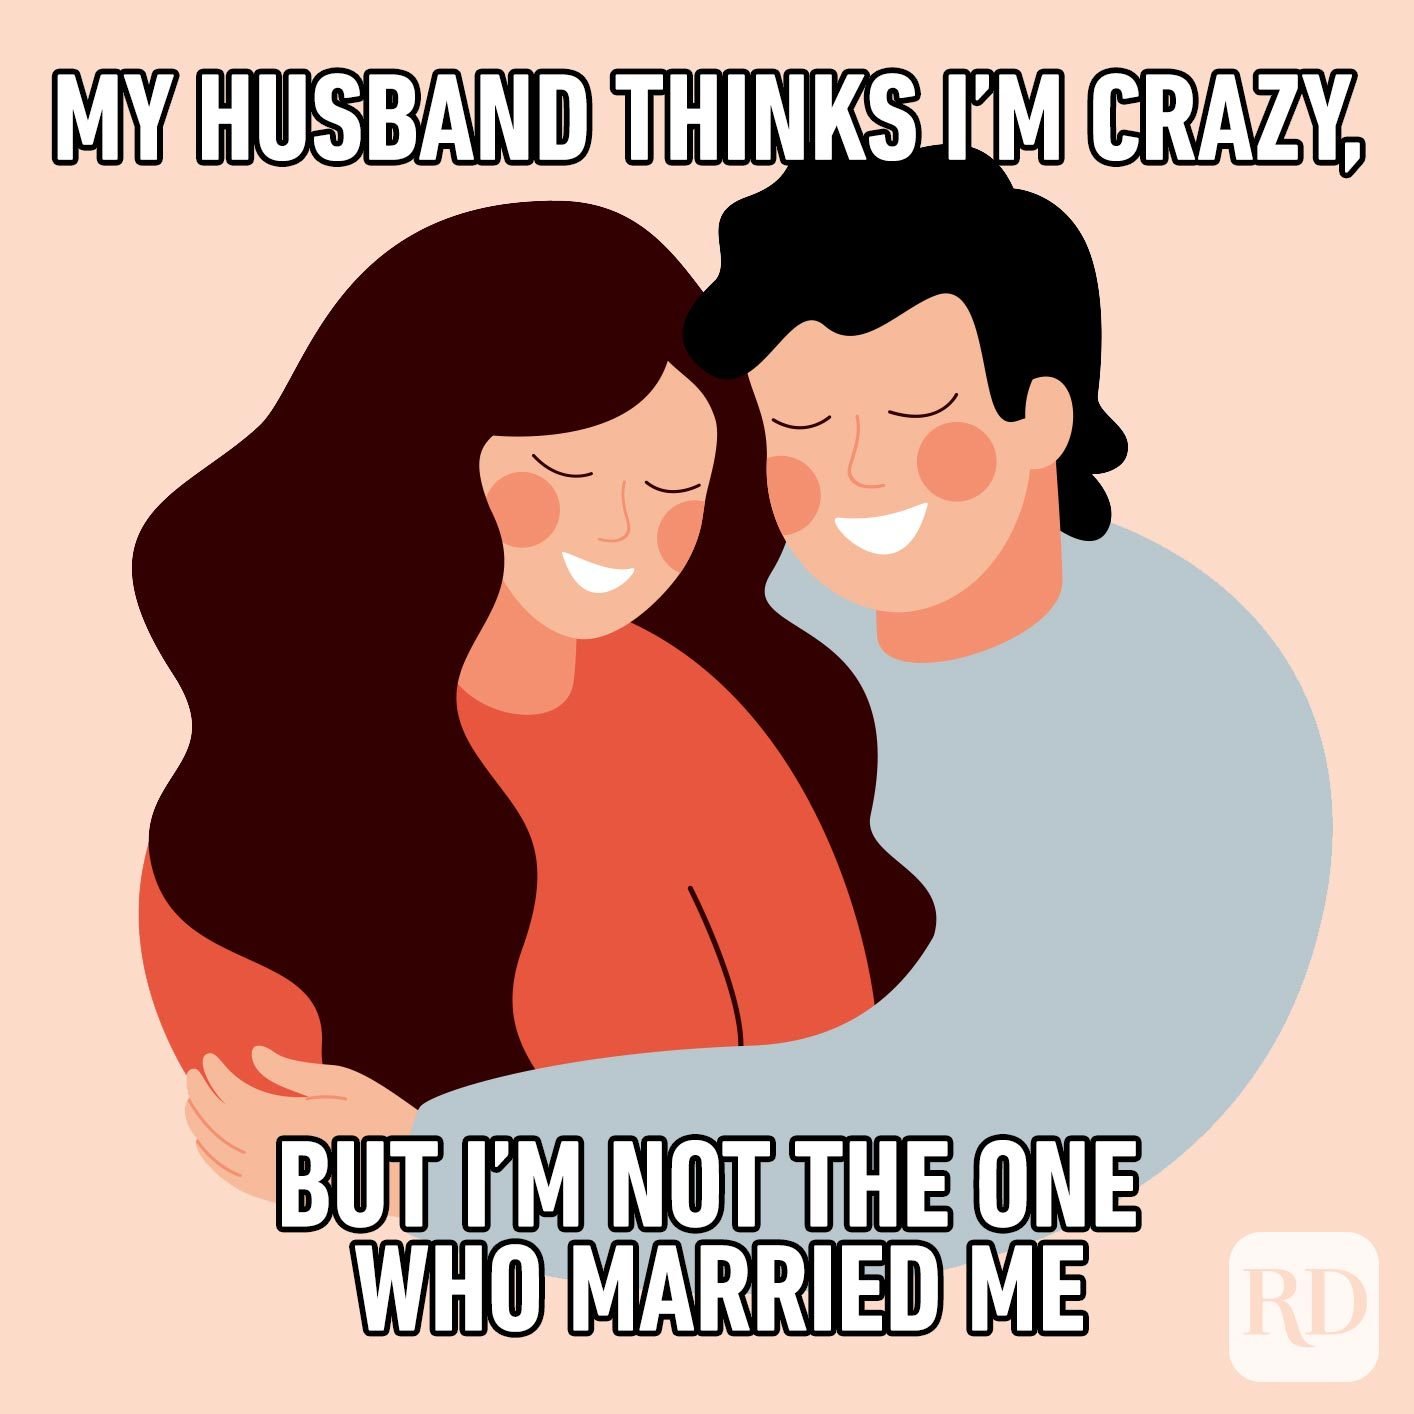 17 Marriage Memes to Make You Laugh Reader's Digest